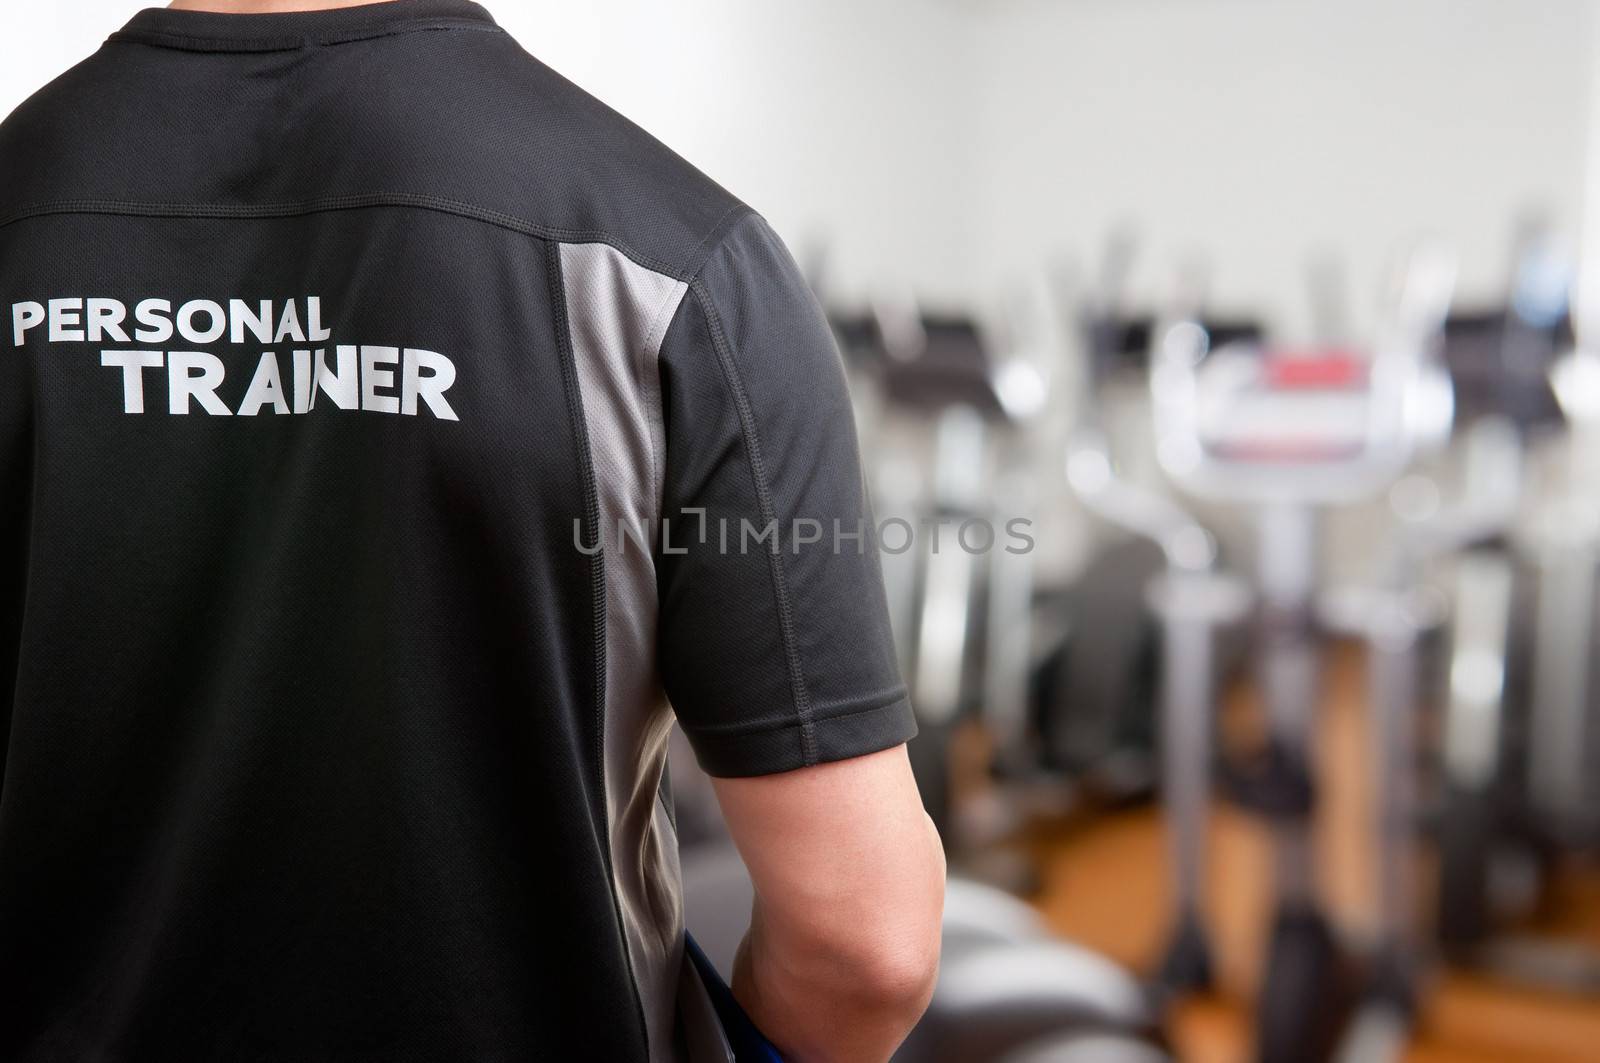 Personal Trainer, with his back facing the camera, looking at a gym